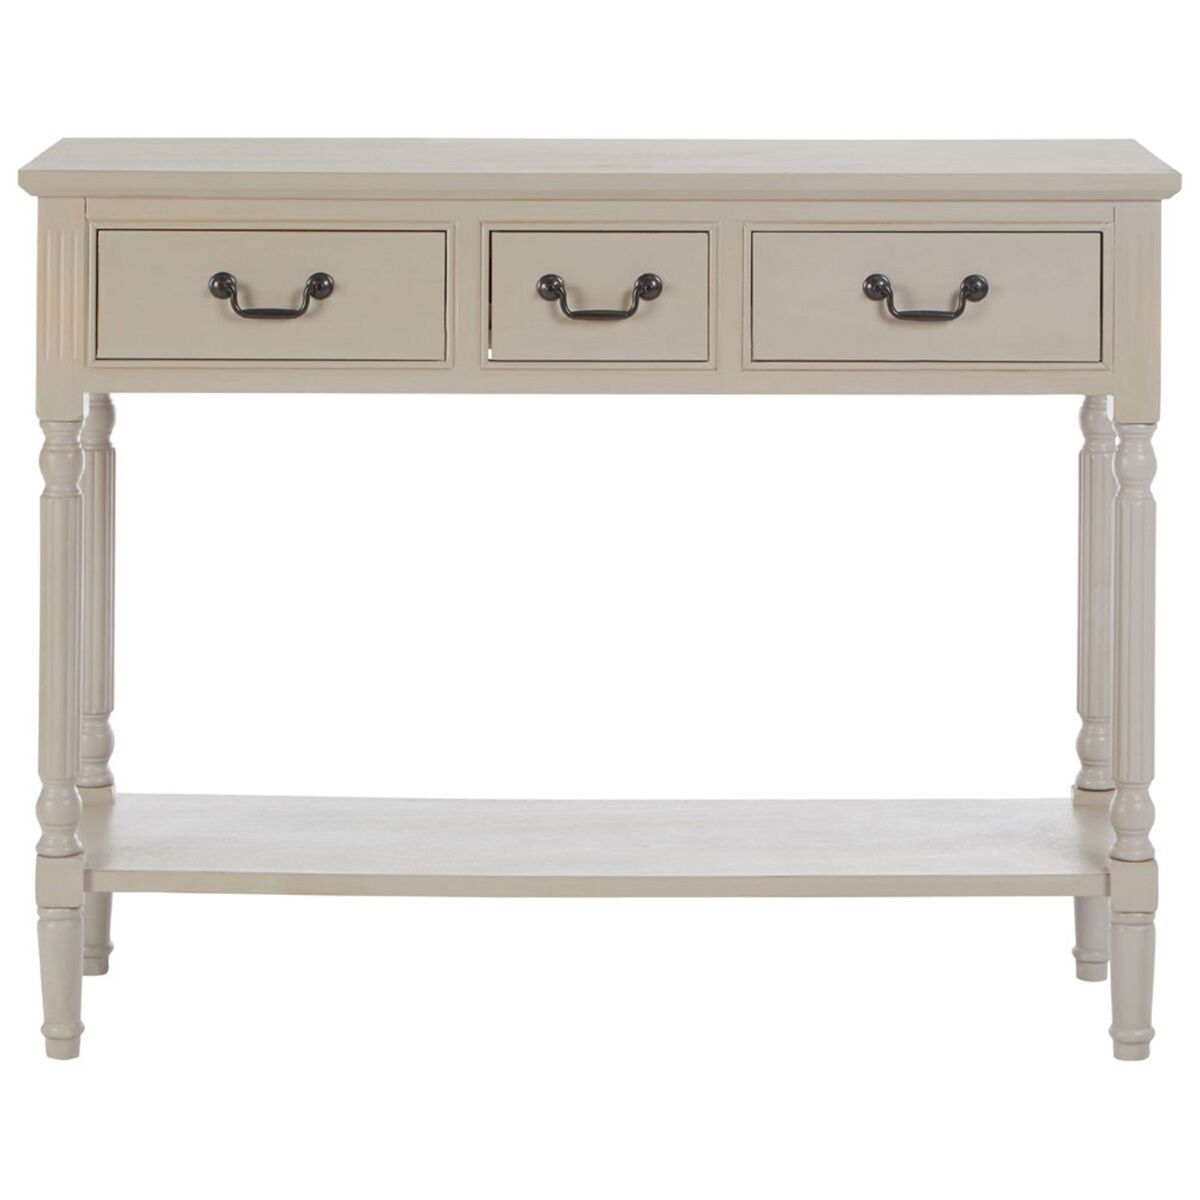 Heritage Console Table Rectangular / 3 Drawers Vintage Grey | Robert Dyas With Regard To Vintage Gray Oak Console Tables (View 4 of 20)